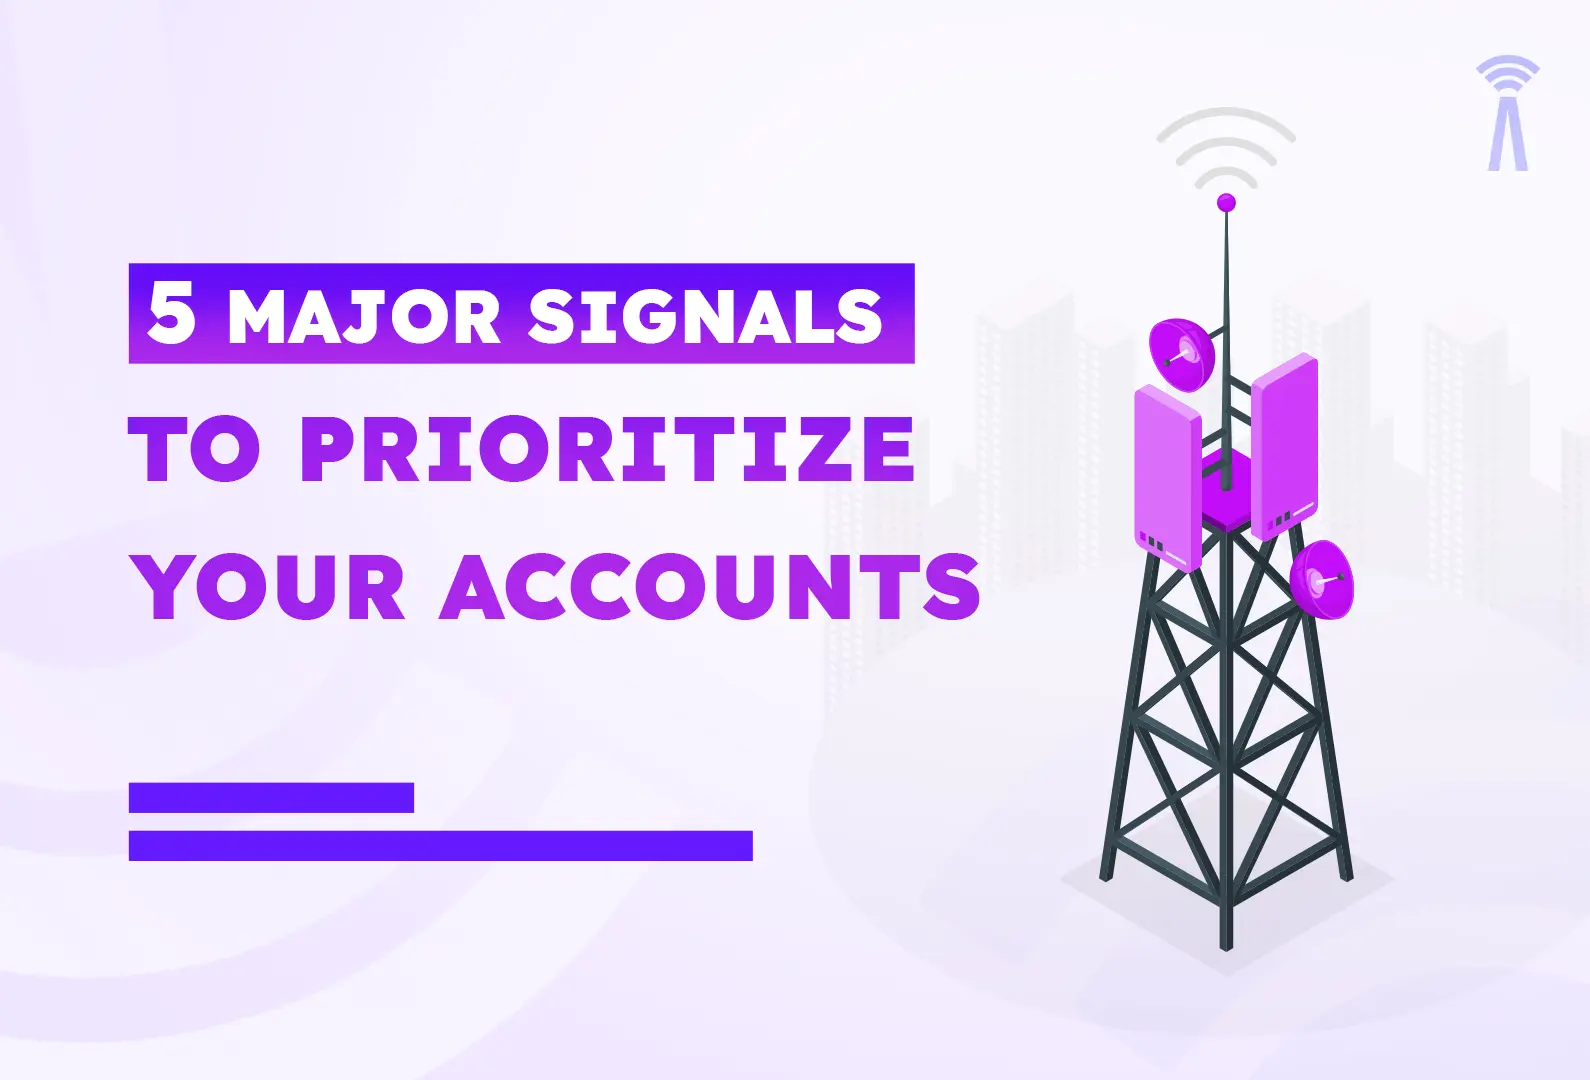 5 Major Signals to Prioritize Your Accounts